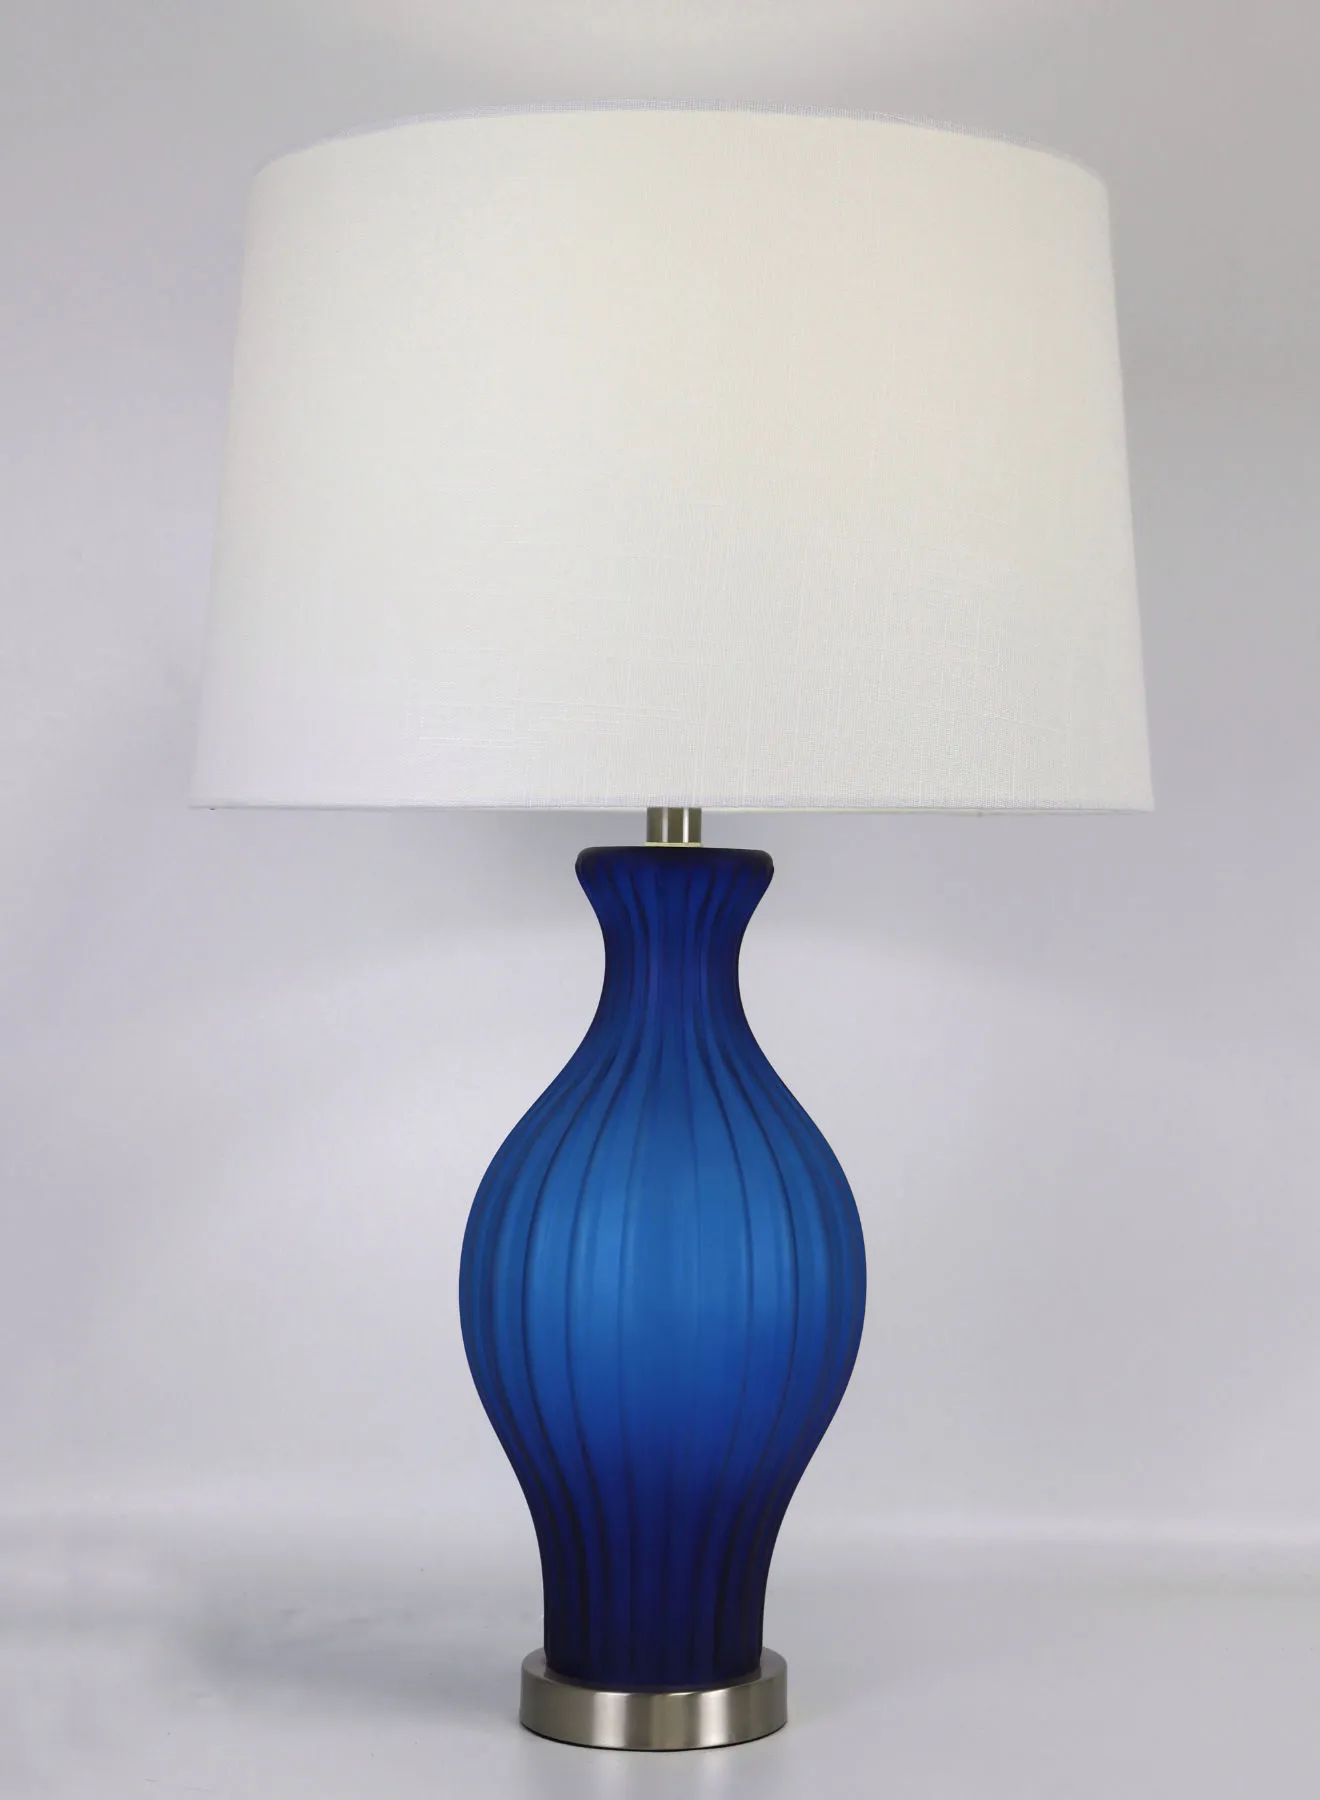 ebb & flow Modern Design Glass Table Lamp Unique Luxury Quality Material for the Perfect Stylish Home RSN71018 Blue 17 x 27